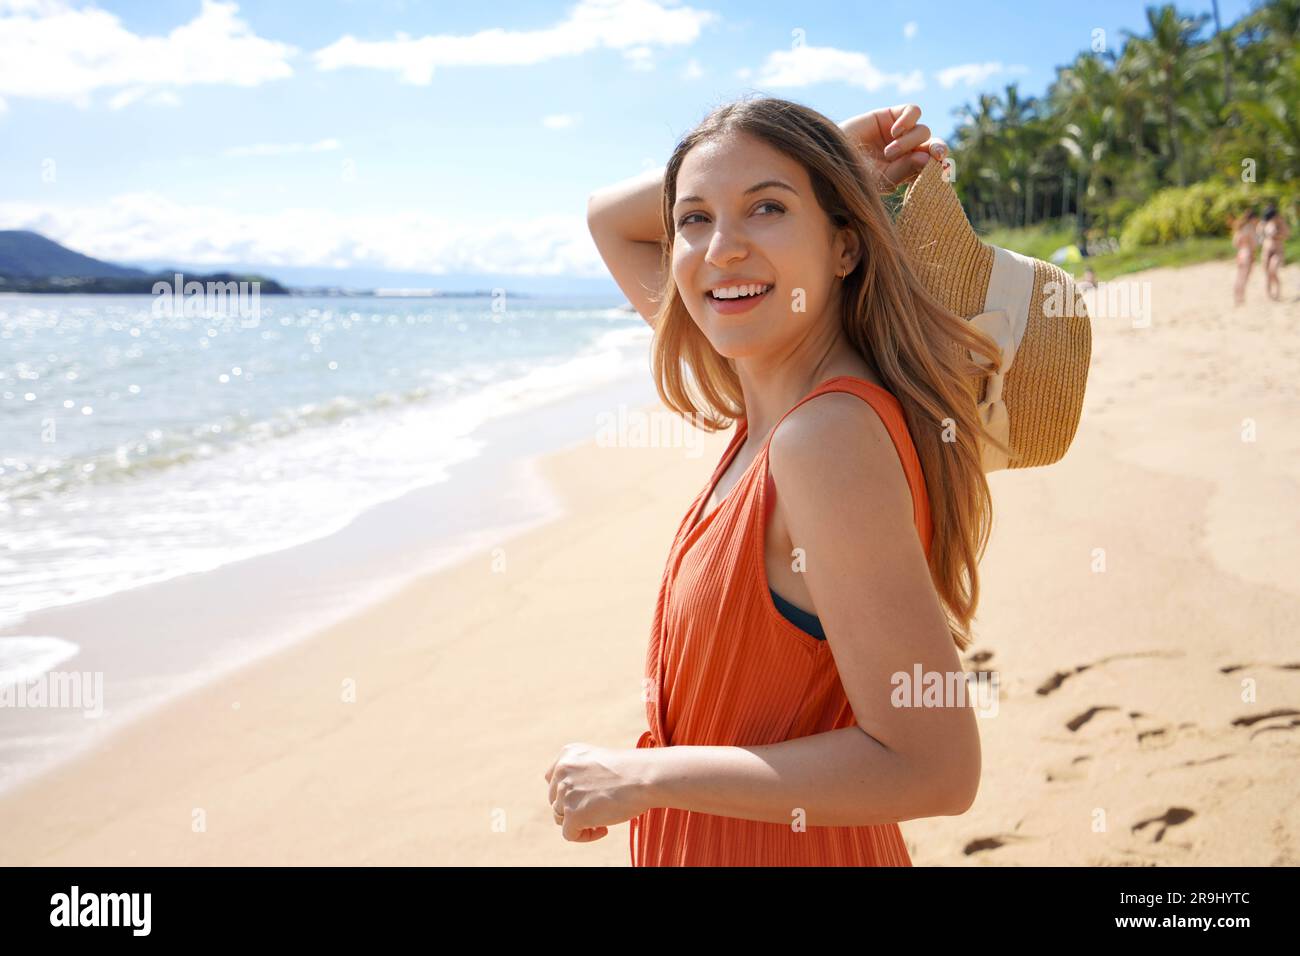 Portrait of beautiful carefree girl holding straw hat on tropical beach looking away Stock Photo